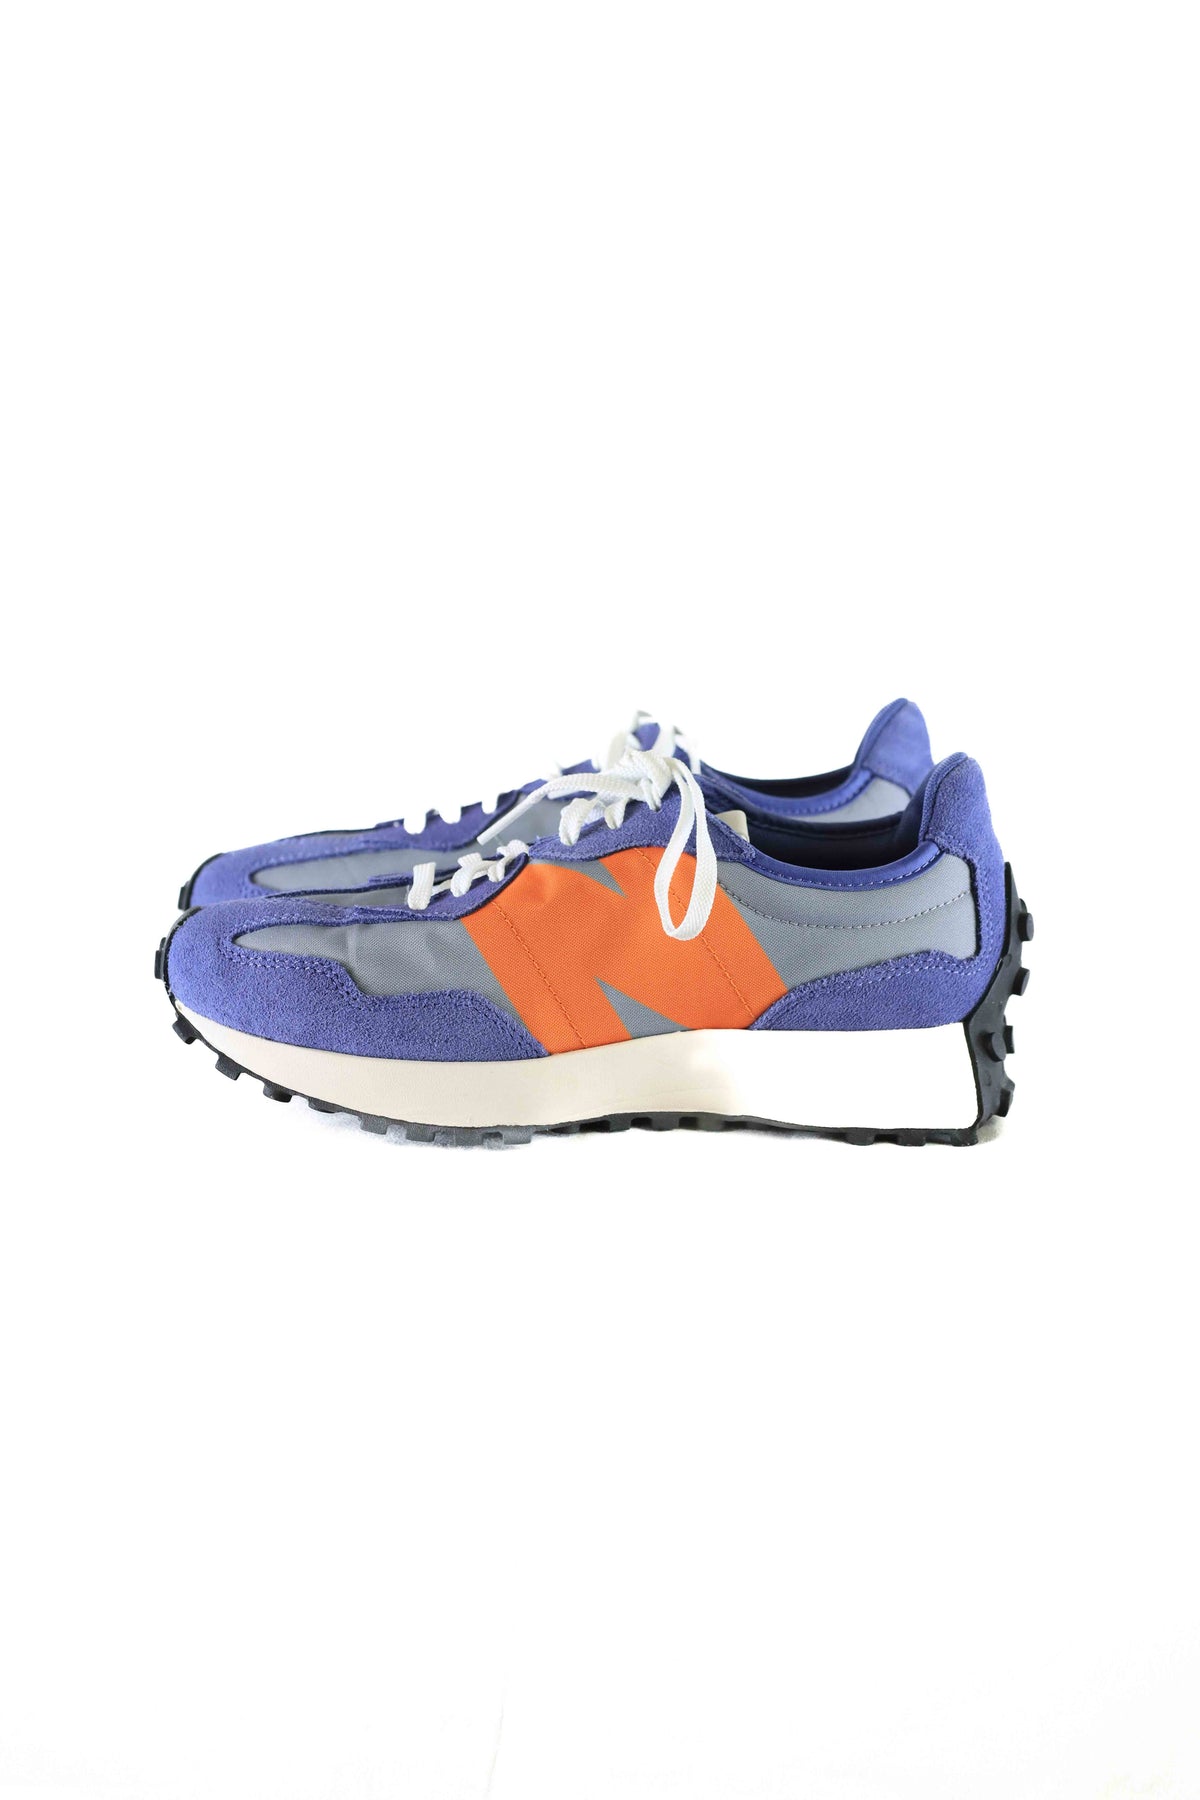 New Balance Blue And Orange Sneakers 327 39